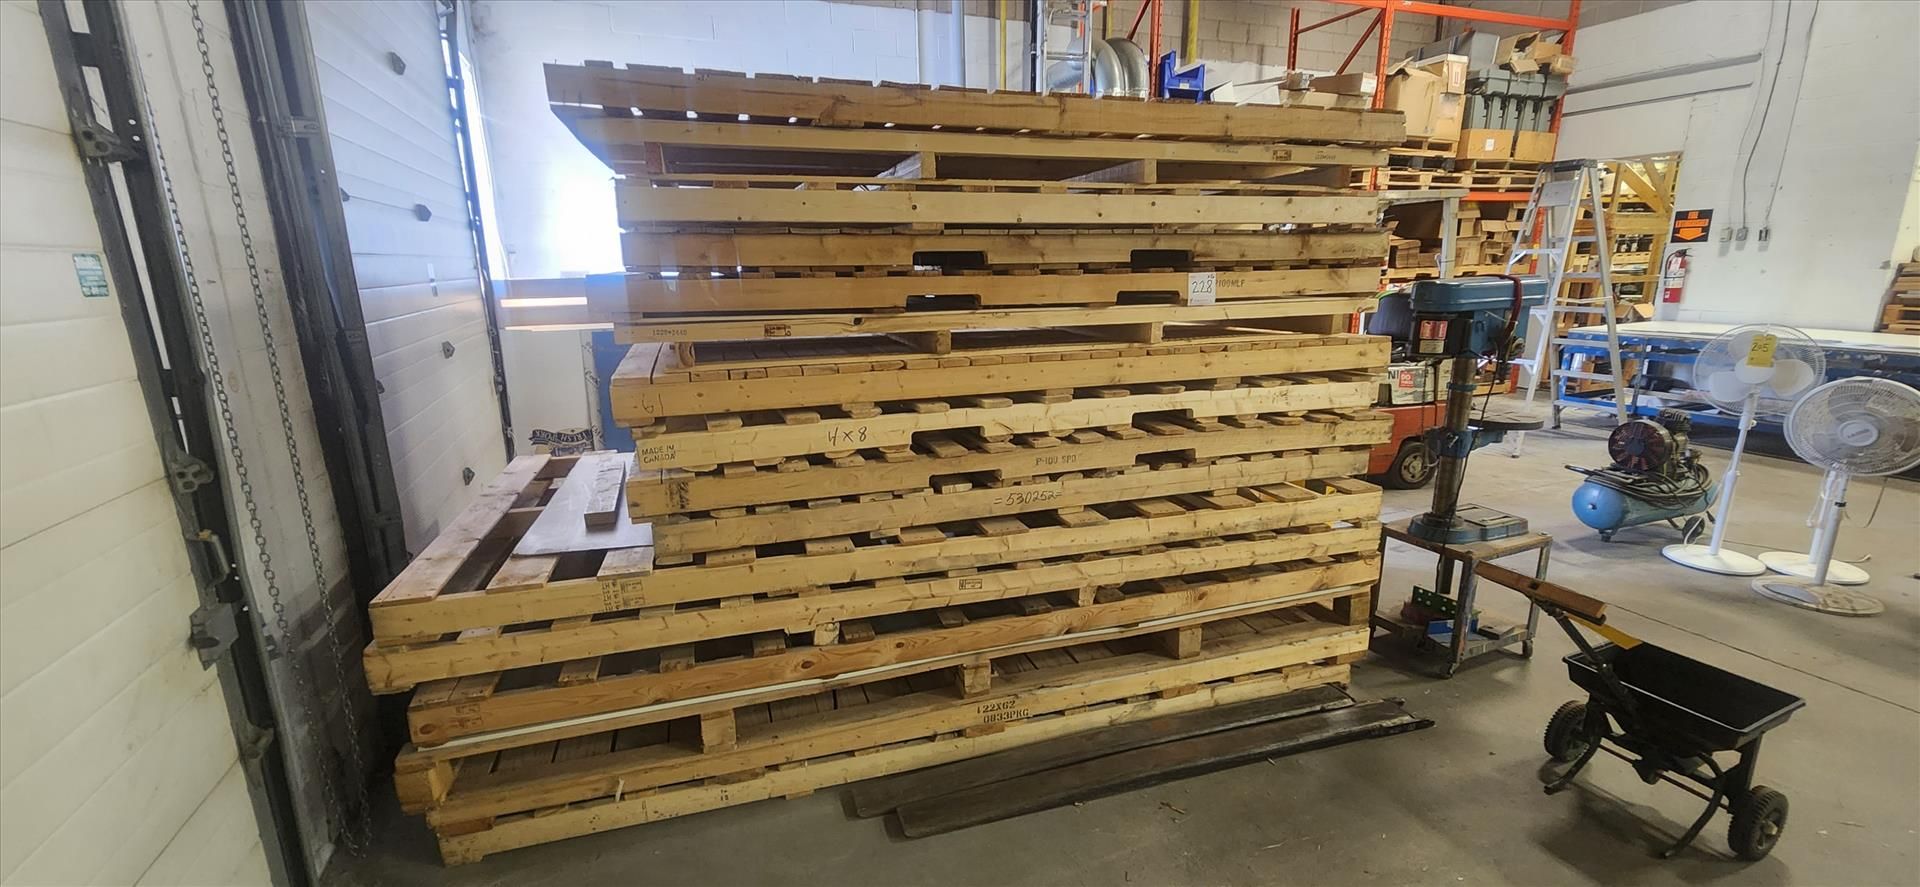 (16) extra long pallets